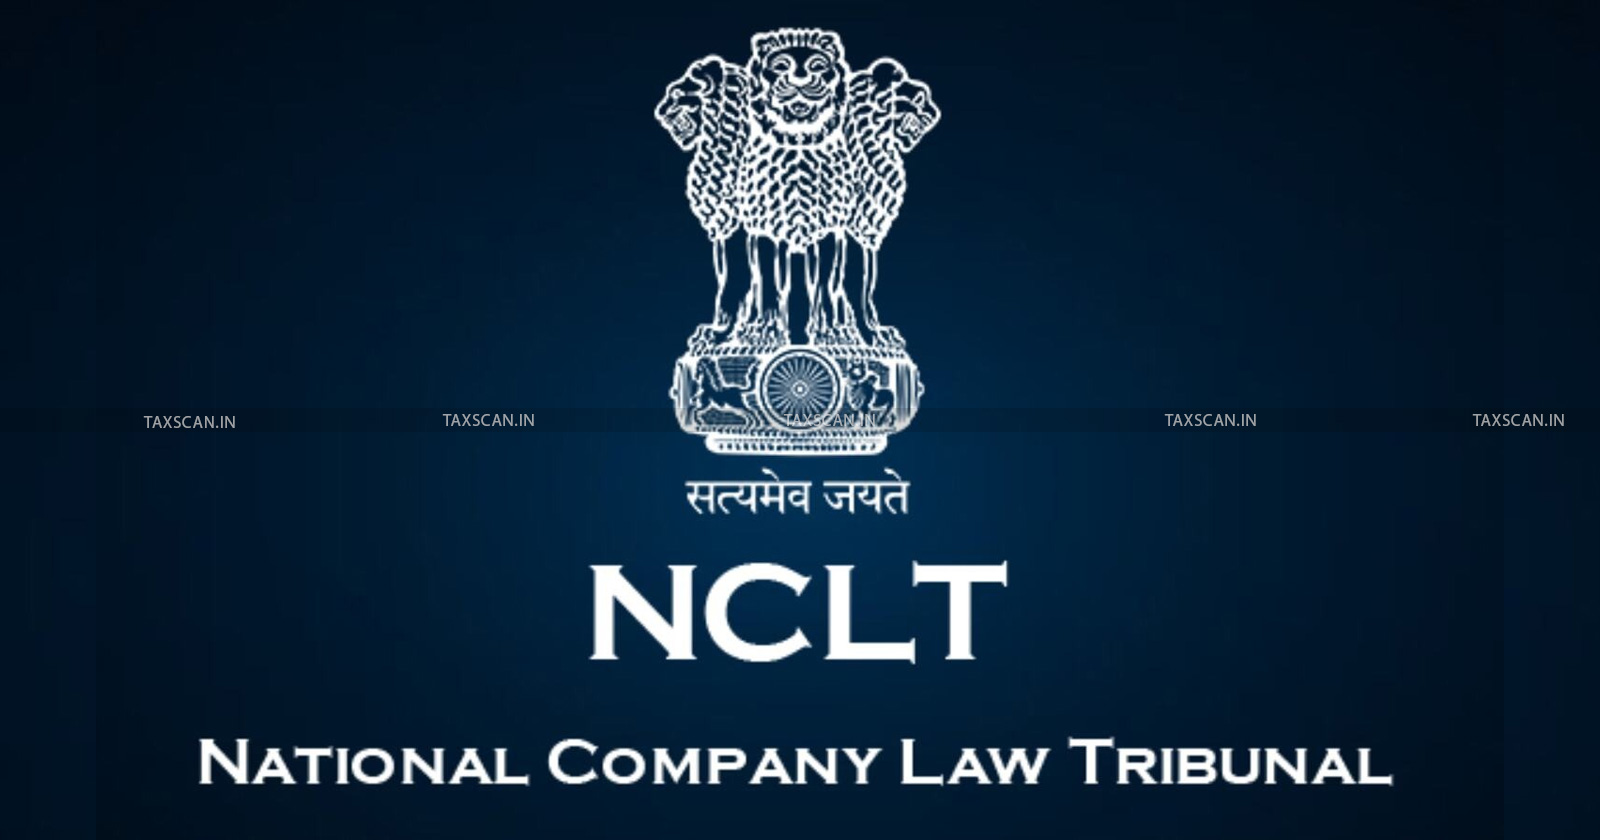 CIRP - Initiated - IBC - Transfer Agreement - Purchase of Debentures - Financial Creditors - NCLT - taxscan